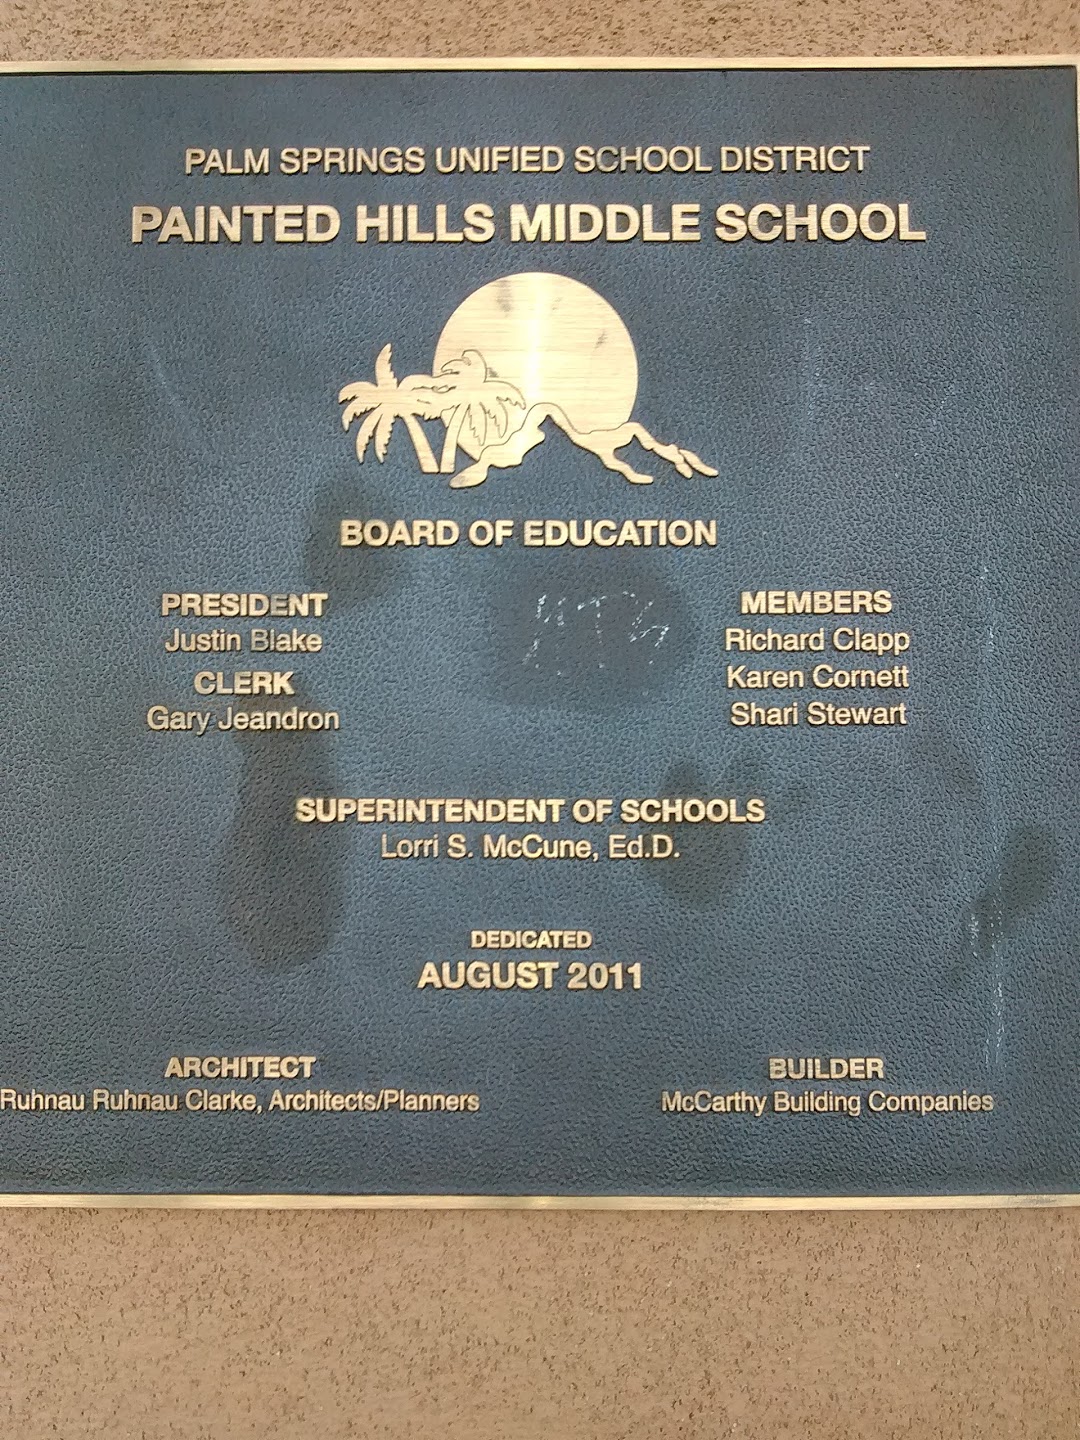 Painted Hills Middle School